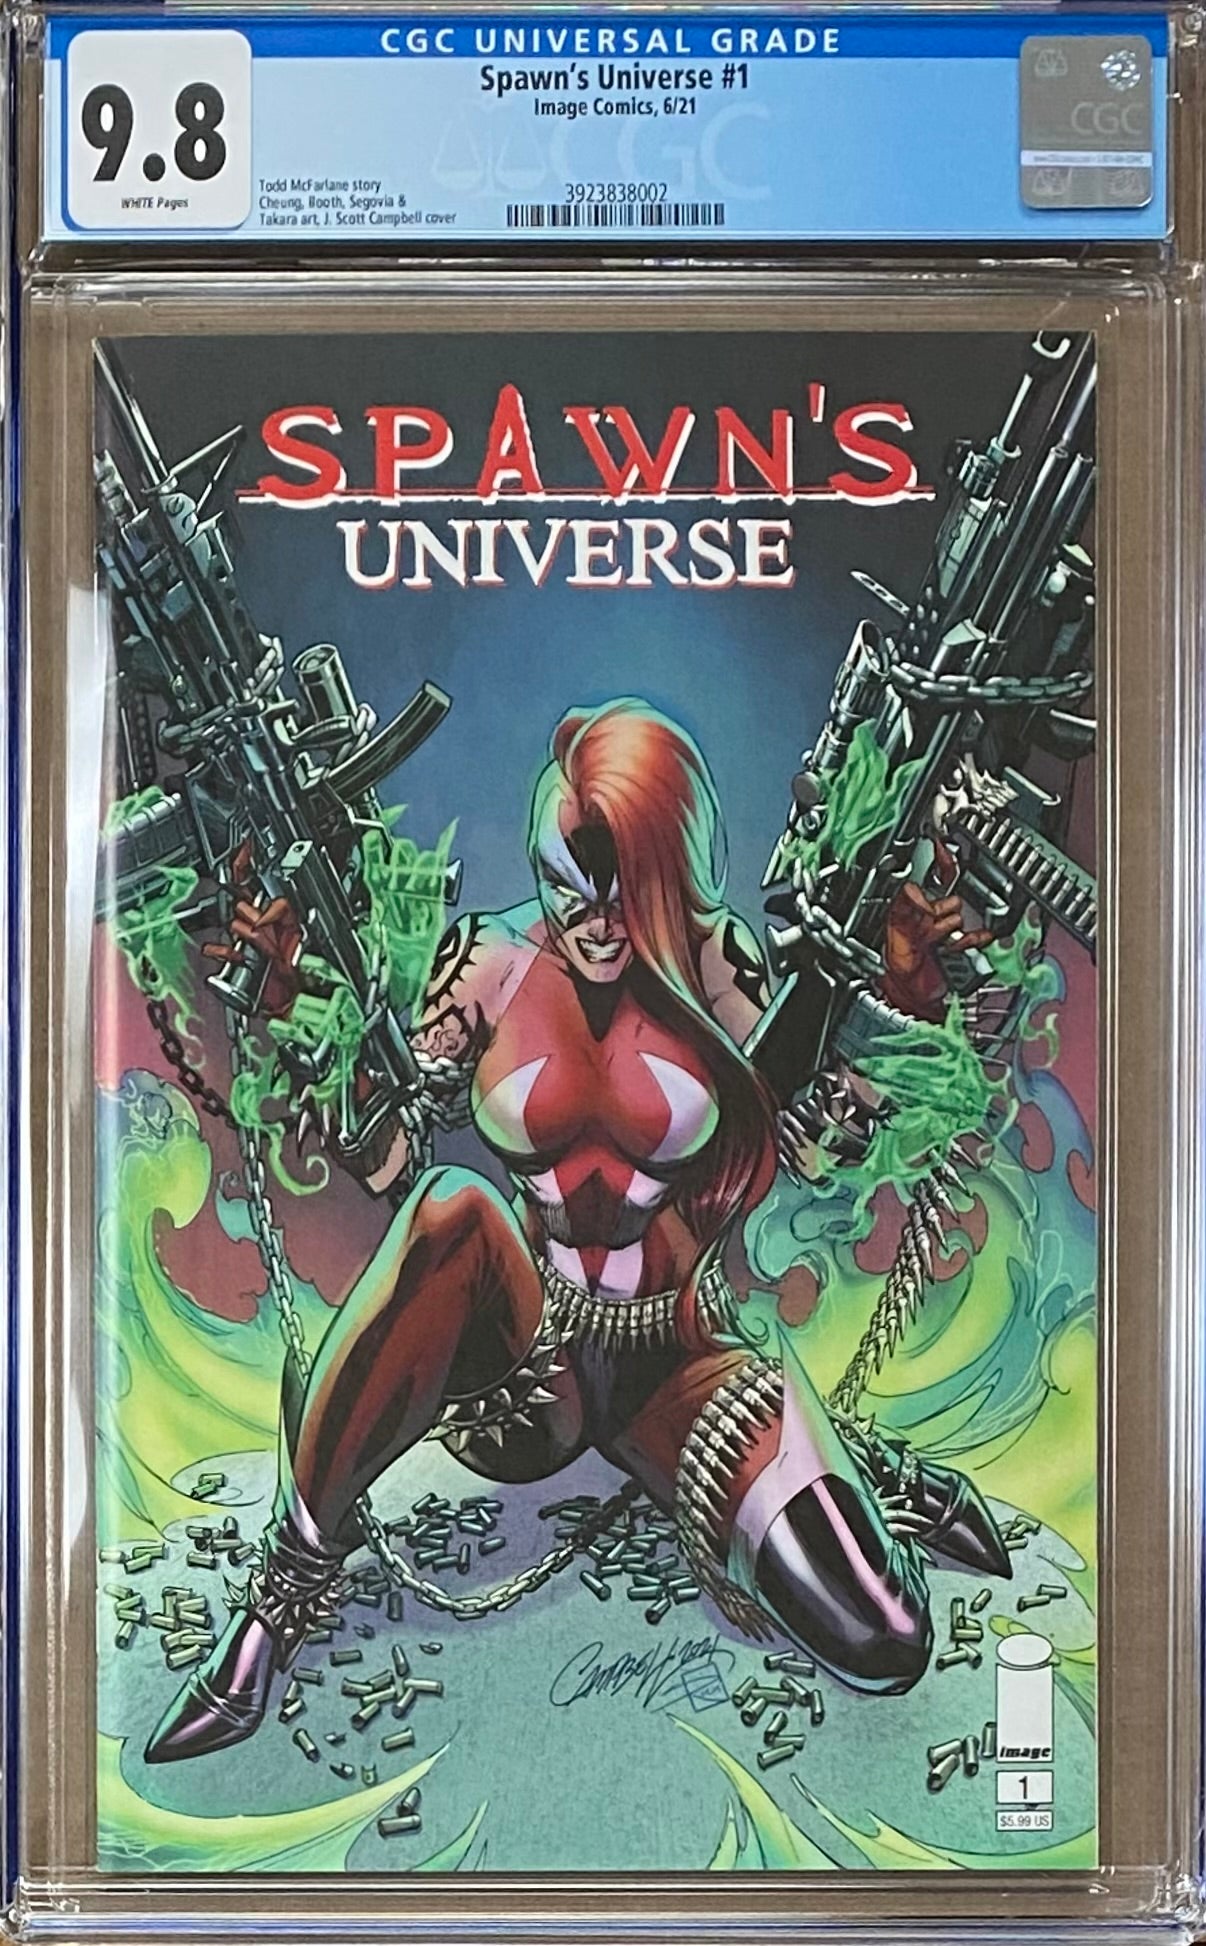 Spawn's Universe #1 Cover A - Campbell "She-Spawn" CGC 9.8